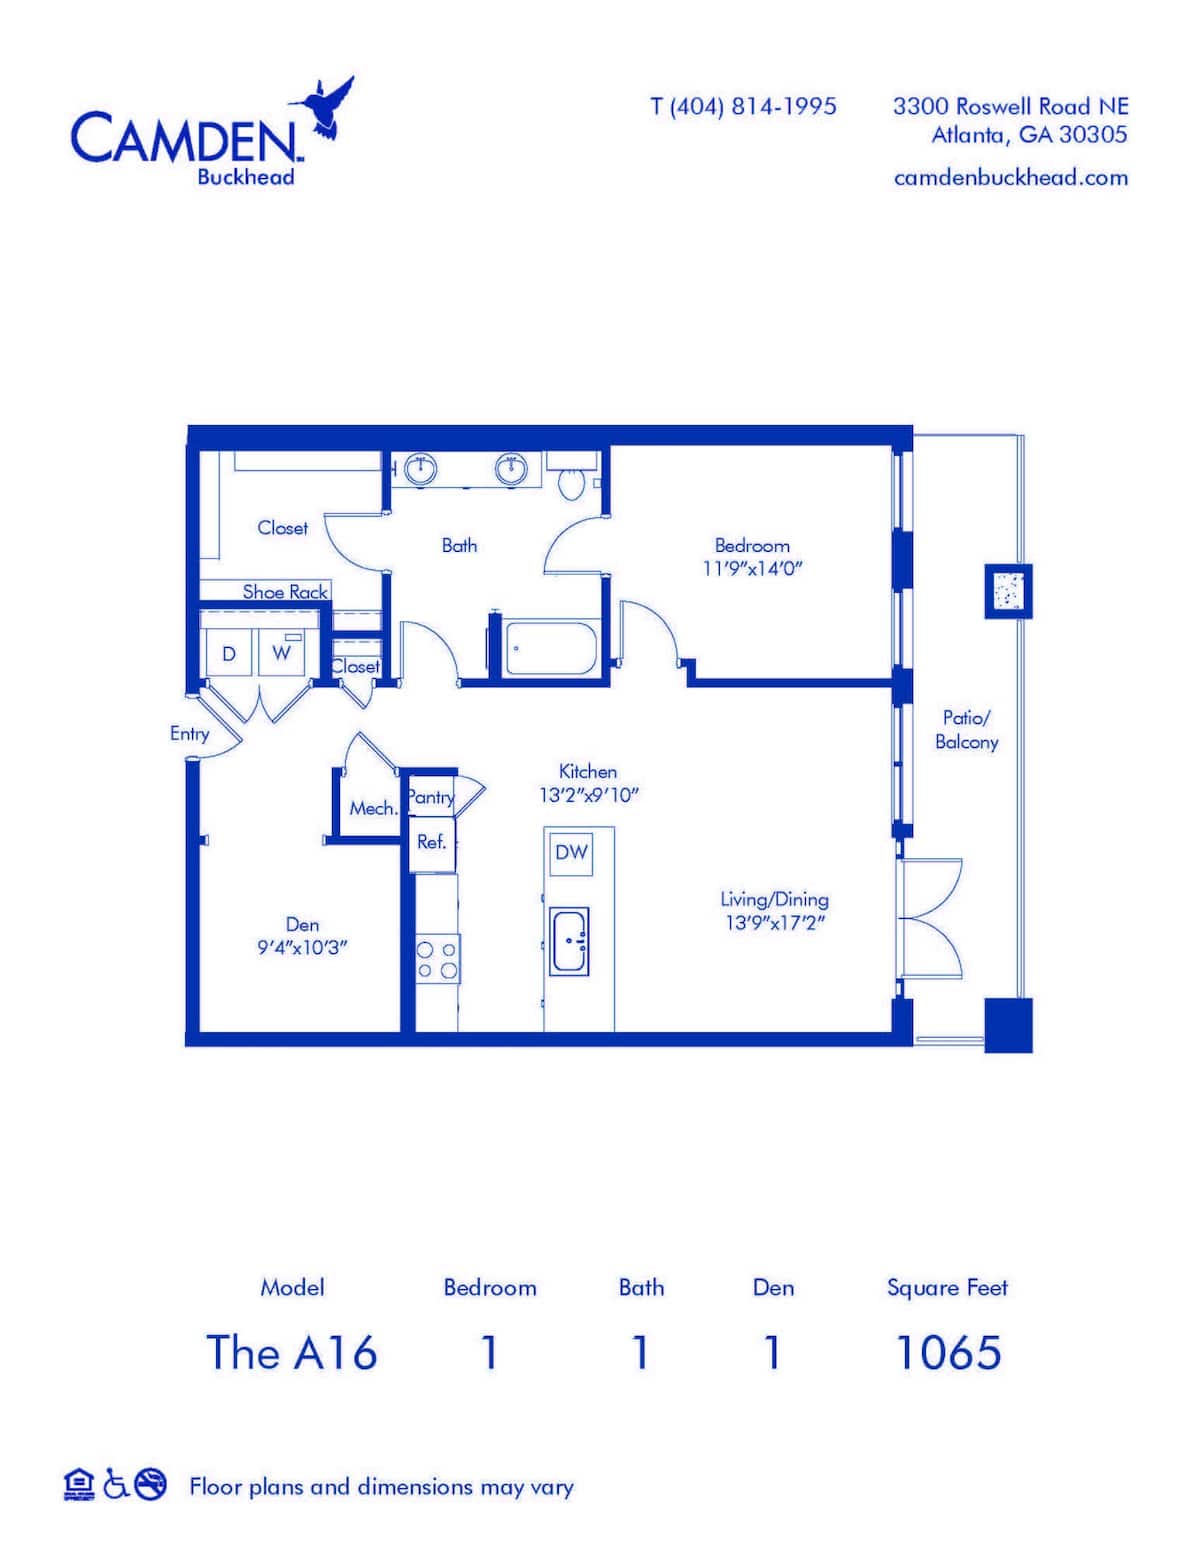 Floorplan diagram for The A16, showing 1 bedroom